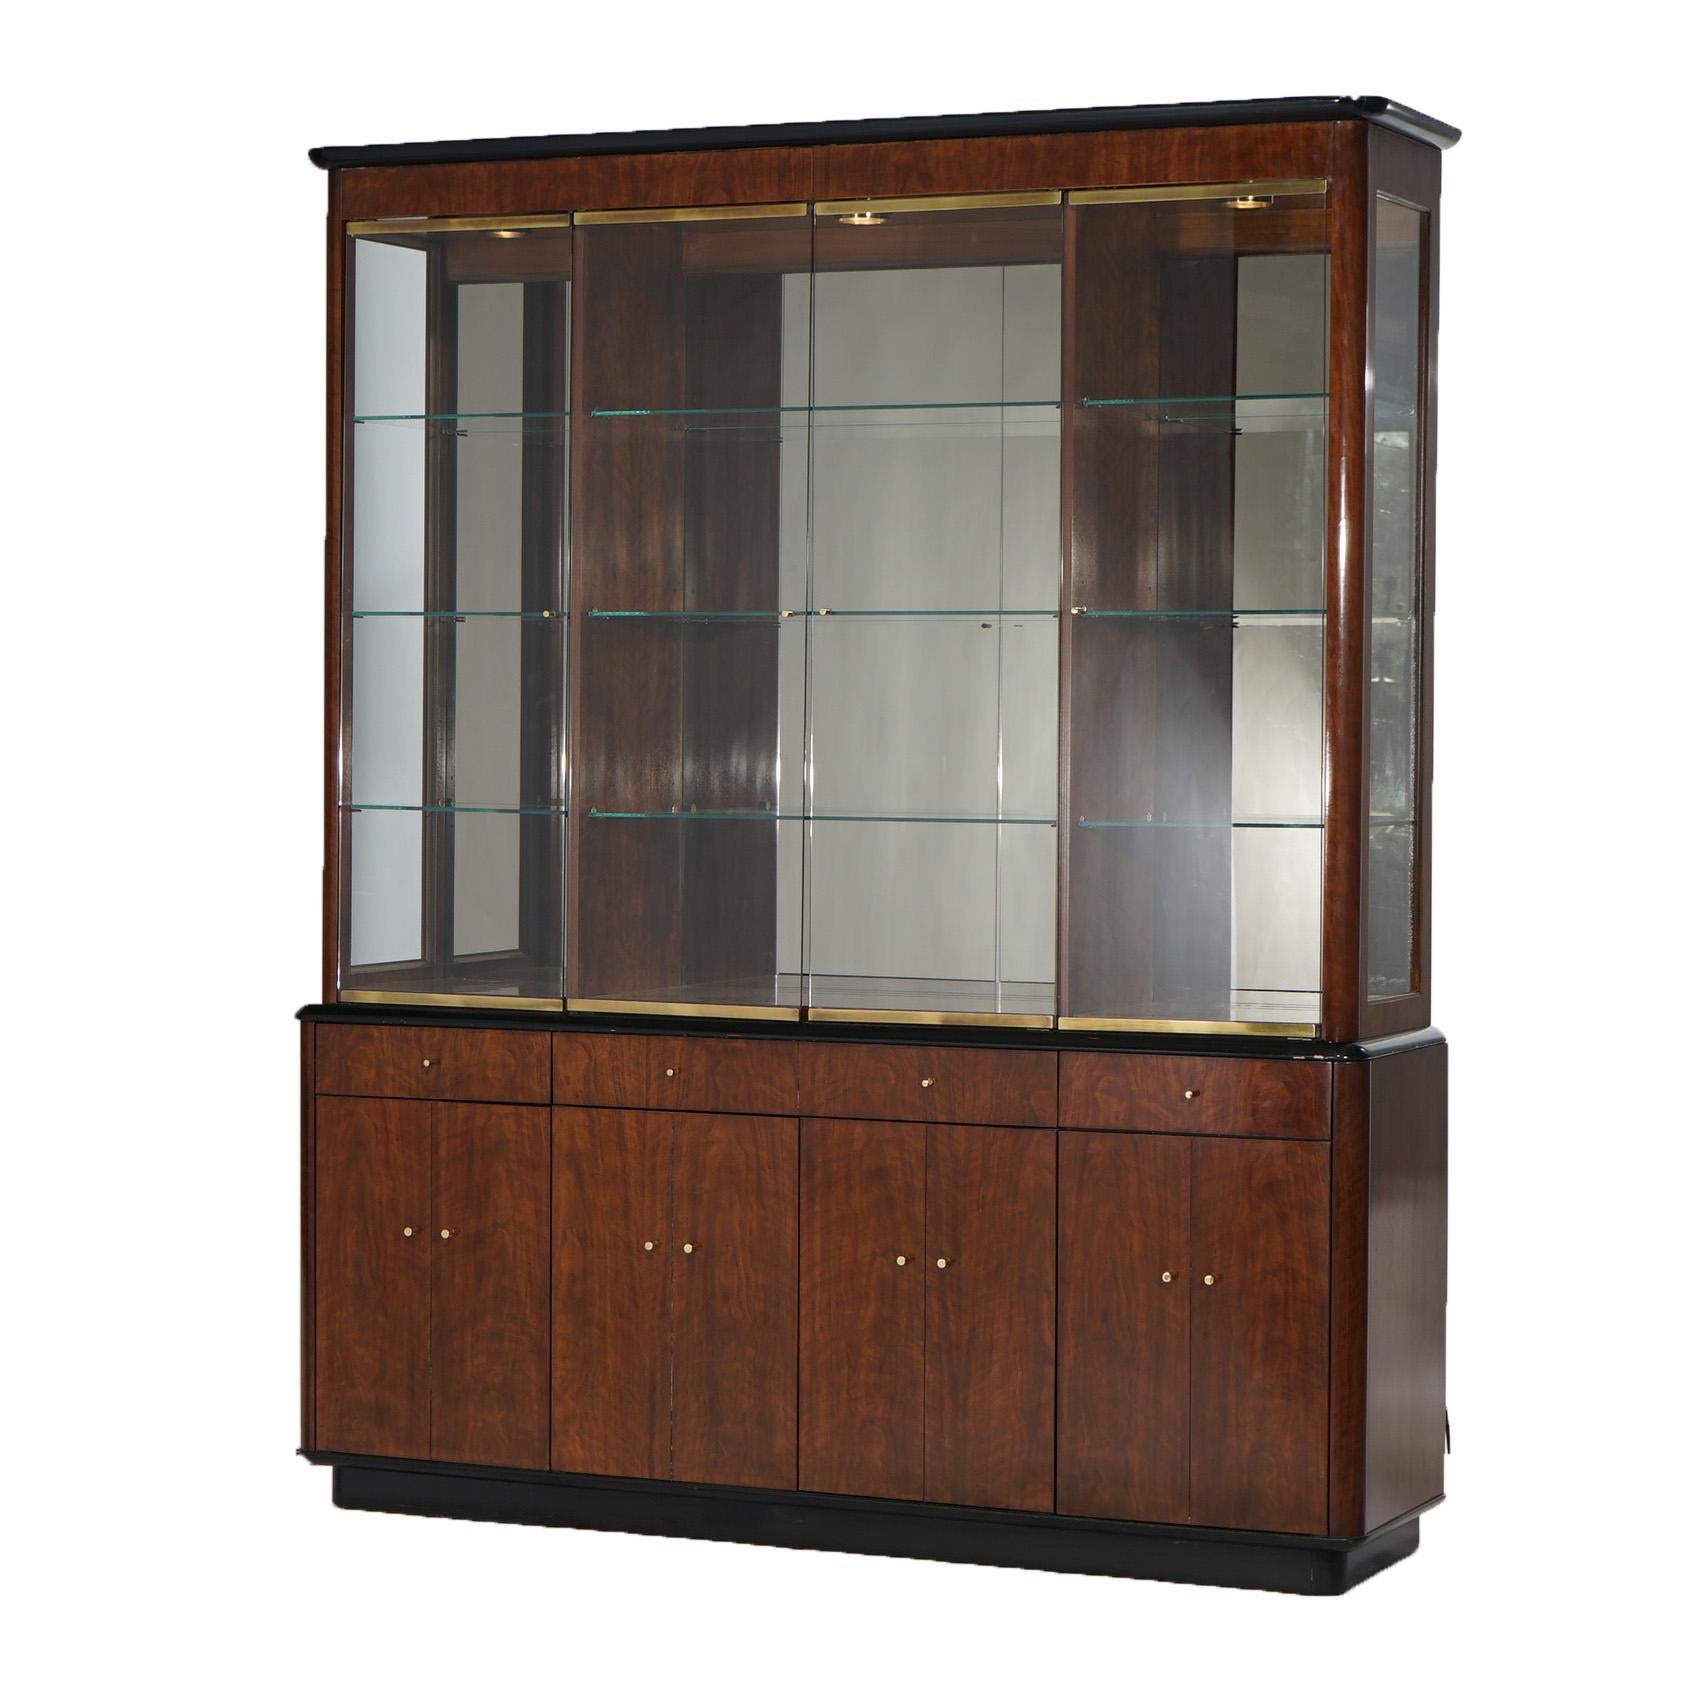 A Mid Century Modern breakfront cabinet by Drexel of the Profiles line offers glass upper over mahogany and ebonized cabinet base, maker label as photographed, 20thC

Measures- 80''H x 66.25''W x 16.25''D